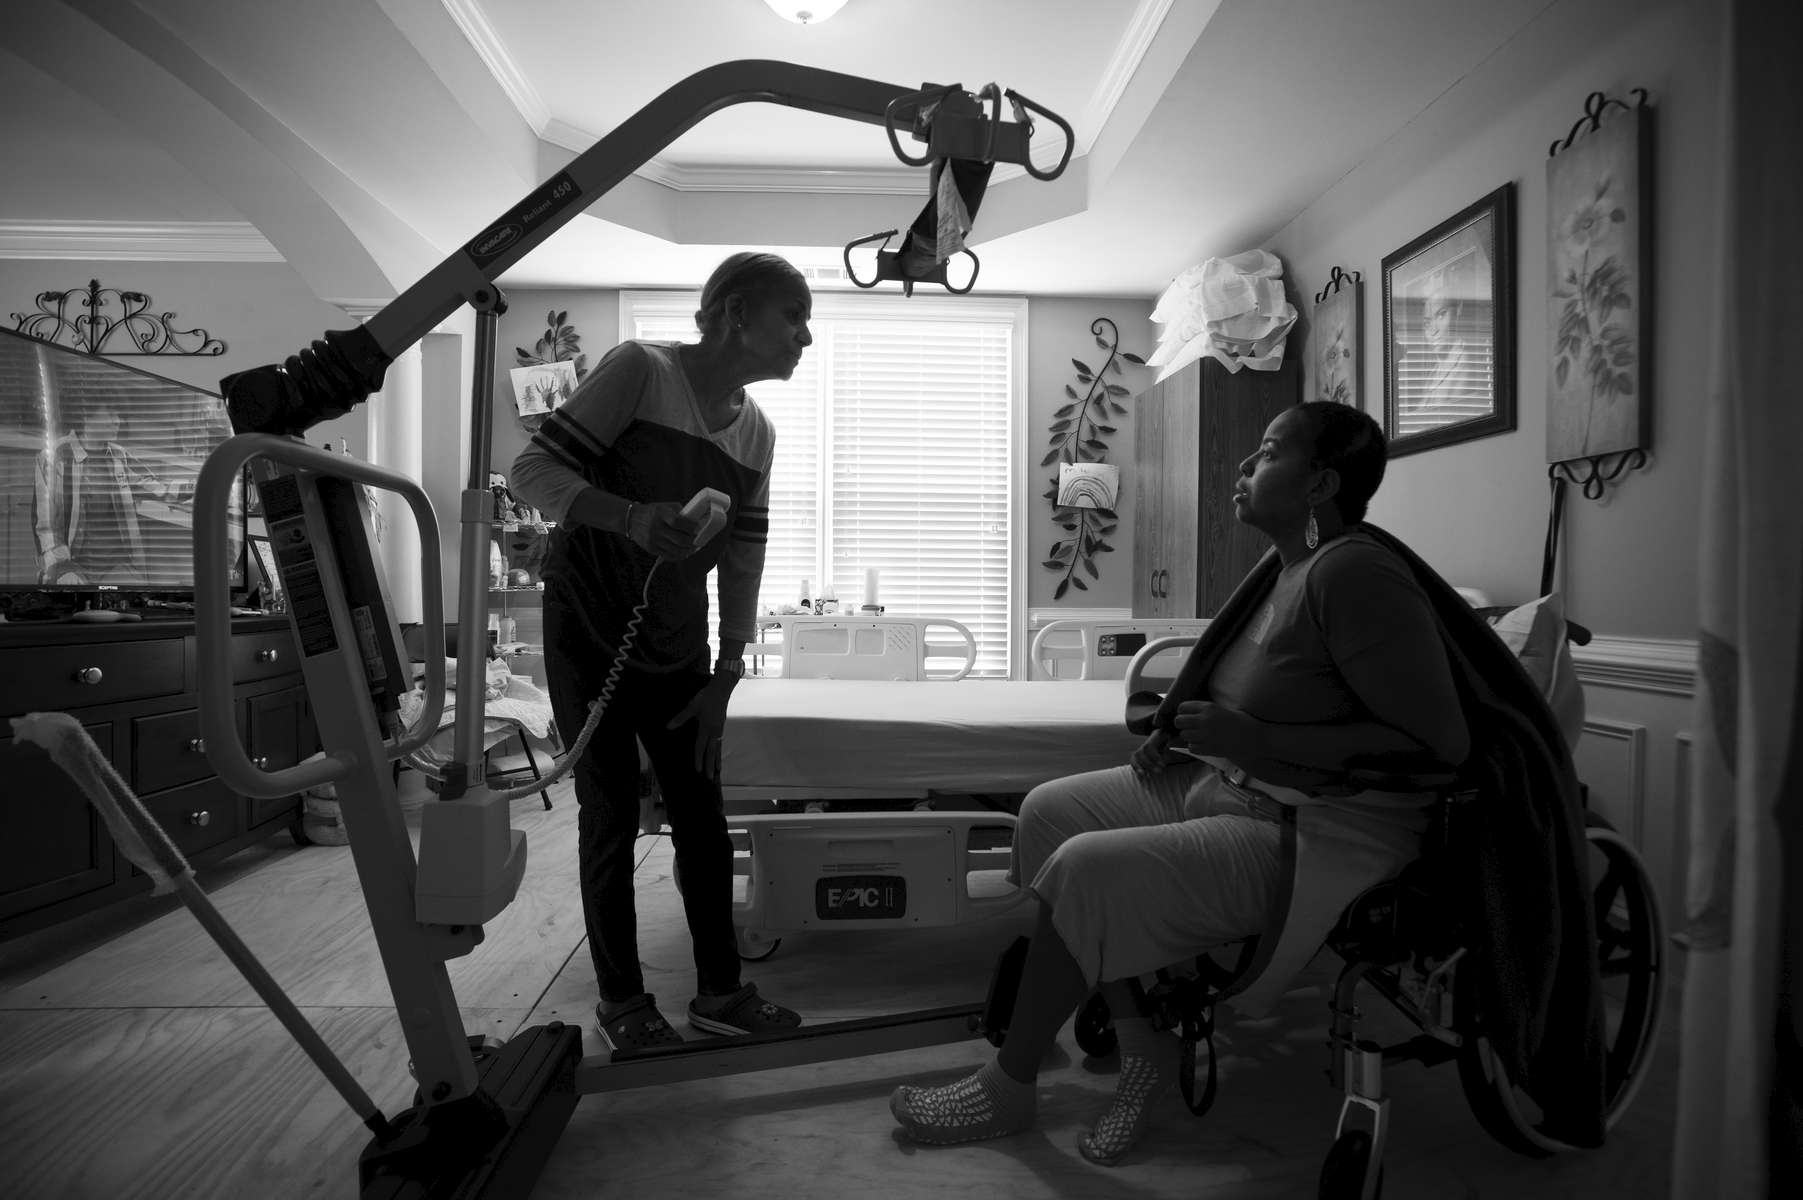 Erika Jones, 32,  is on the slow path to recovery from a brain tumor that left her paralyzed and unable to speak more than a few words. Her mother Joyce Jones insisted she be moved back into her family's home rather than a nursing facility. {quote}I am committed to caring for my baby until the day I die,{quote} Joyce explained. {quote}She wouldn't get that love in a nursing home.{quote} Pictured: Joyce Jones chats with Erika in what was once family dining room, now converted to Erika's room on the ground floor. The electric lift used to move Erika from bed to chair was donated by a local rehabilitation hospital.